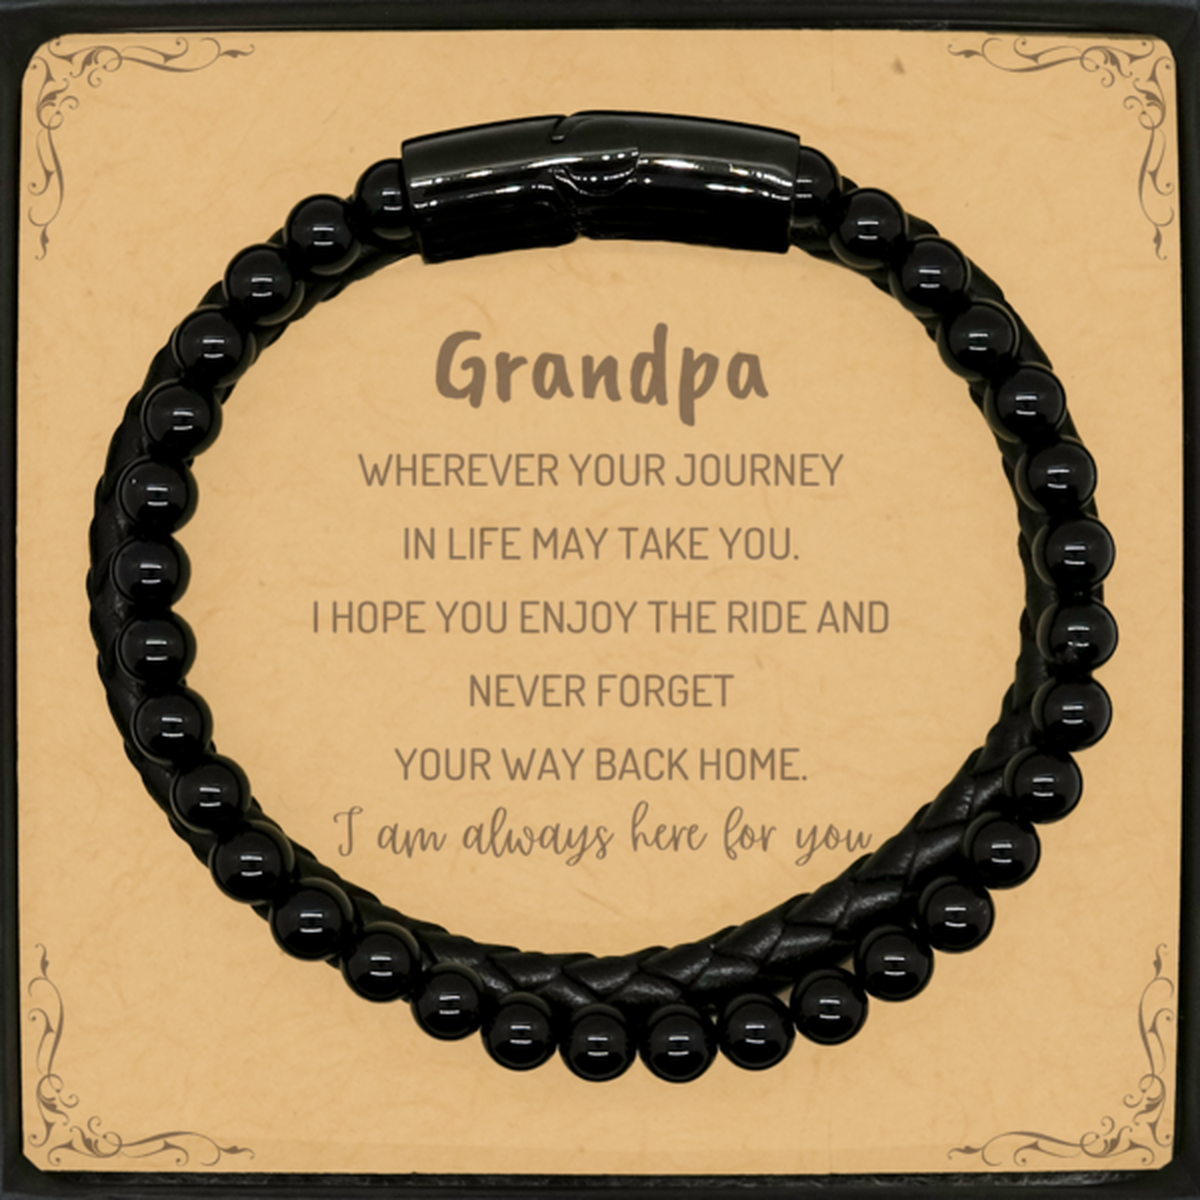 Grandpa wherever your journey in life may take you, I am always here for you Grandpa Stone Leather Bracelets, Awesome Christmas Gifts For Grandpa Message Card, Grandpa Birthday Gifts for Men Women Family Loved One